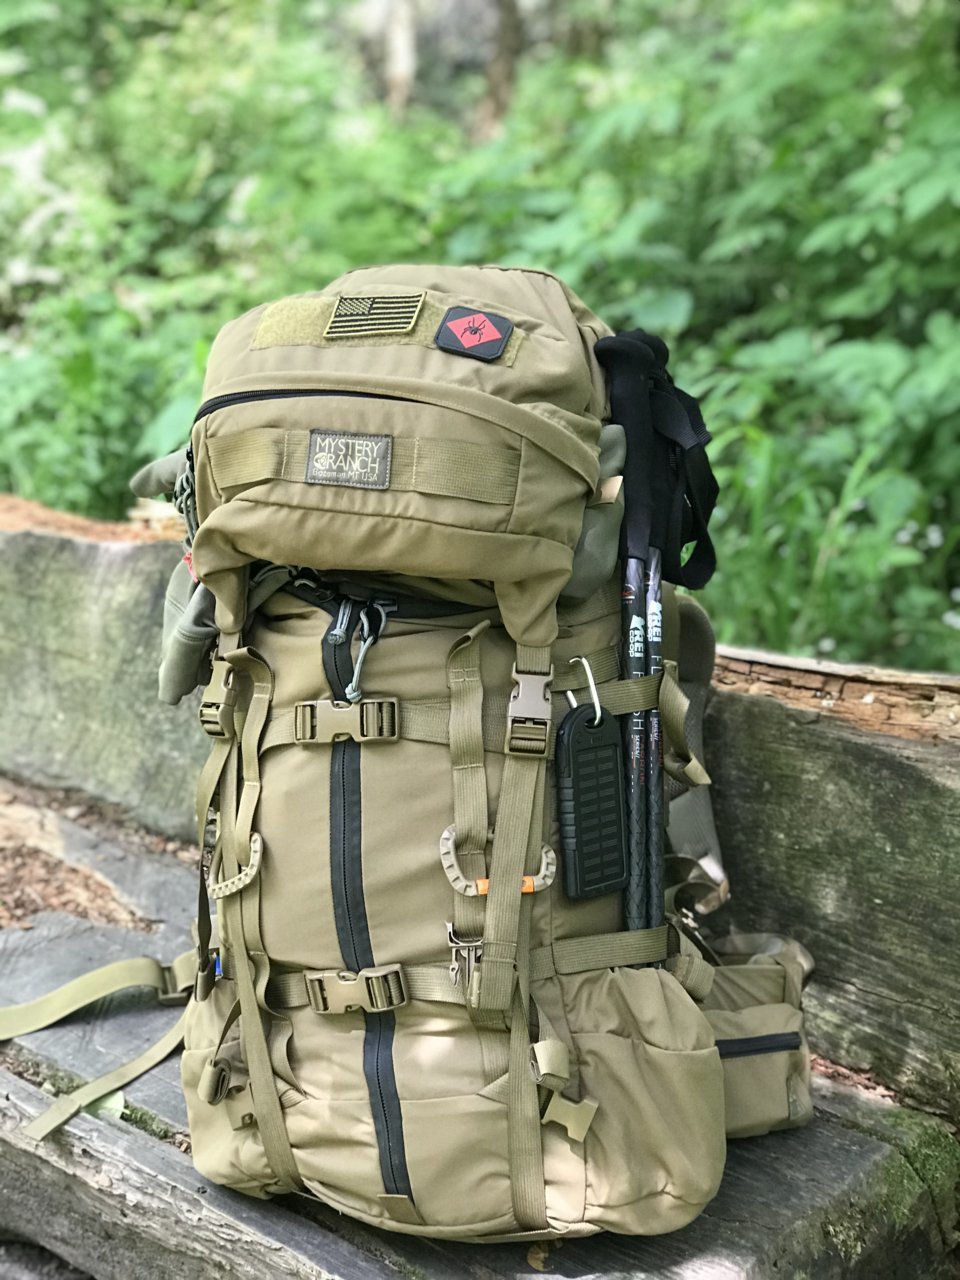 Mystery Ranch Overload Pack w/ Daypack lid | Tacoma World